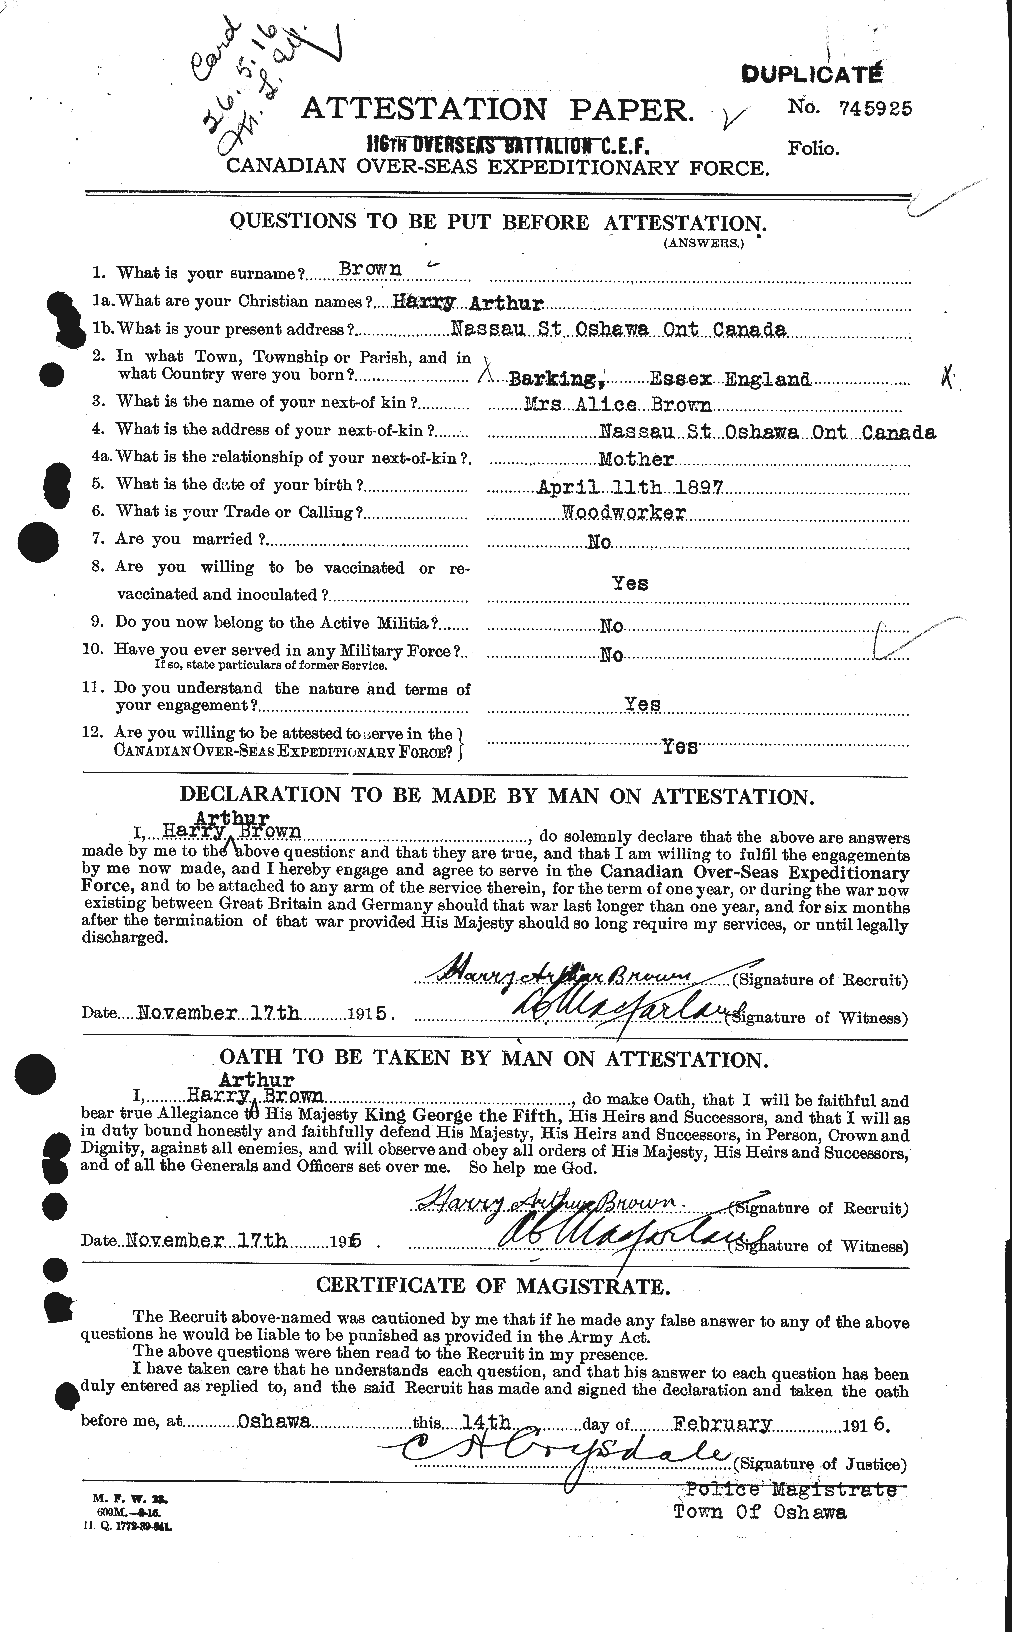 Personnel Records of the First World War - CEF 265439a